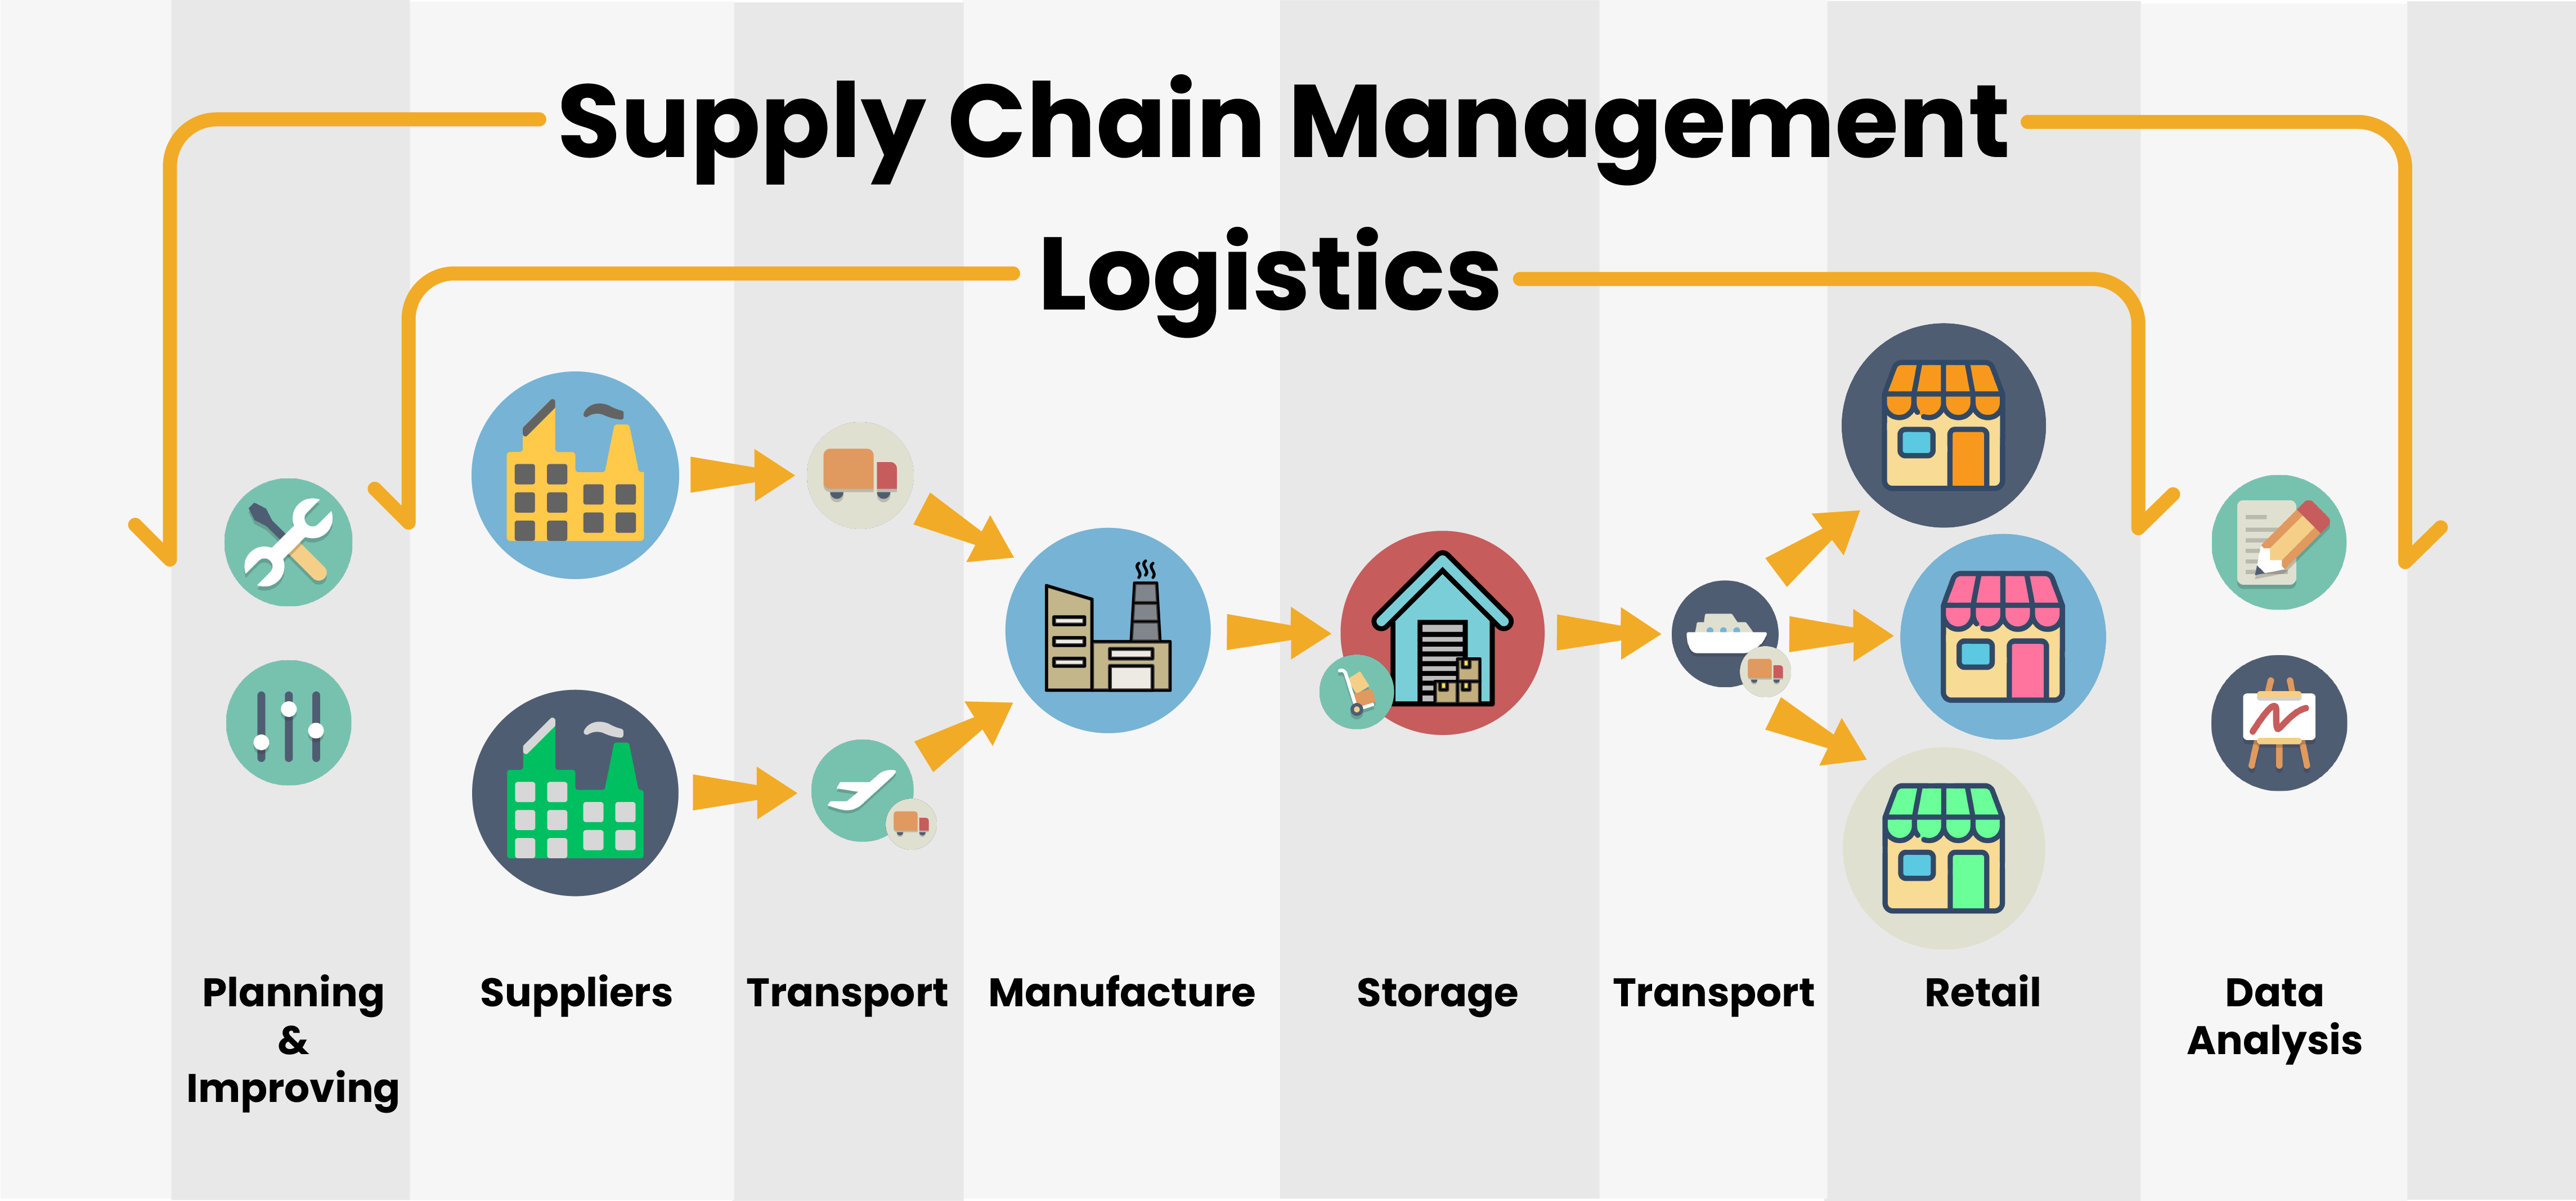 thesis on logistics and supply chain management